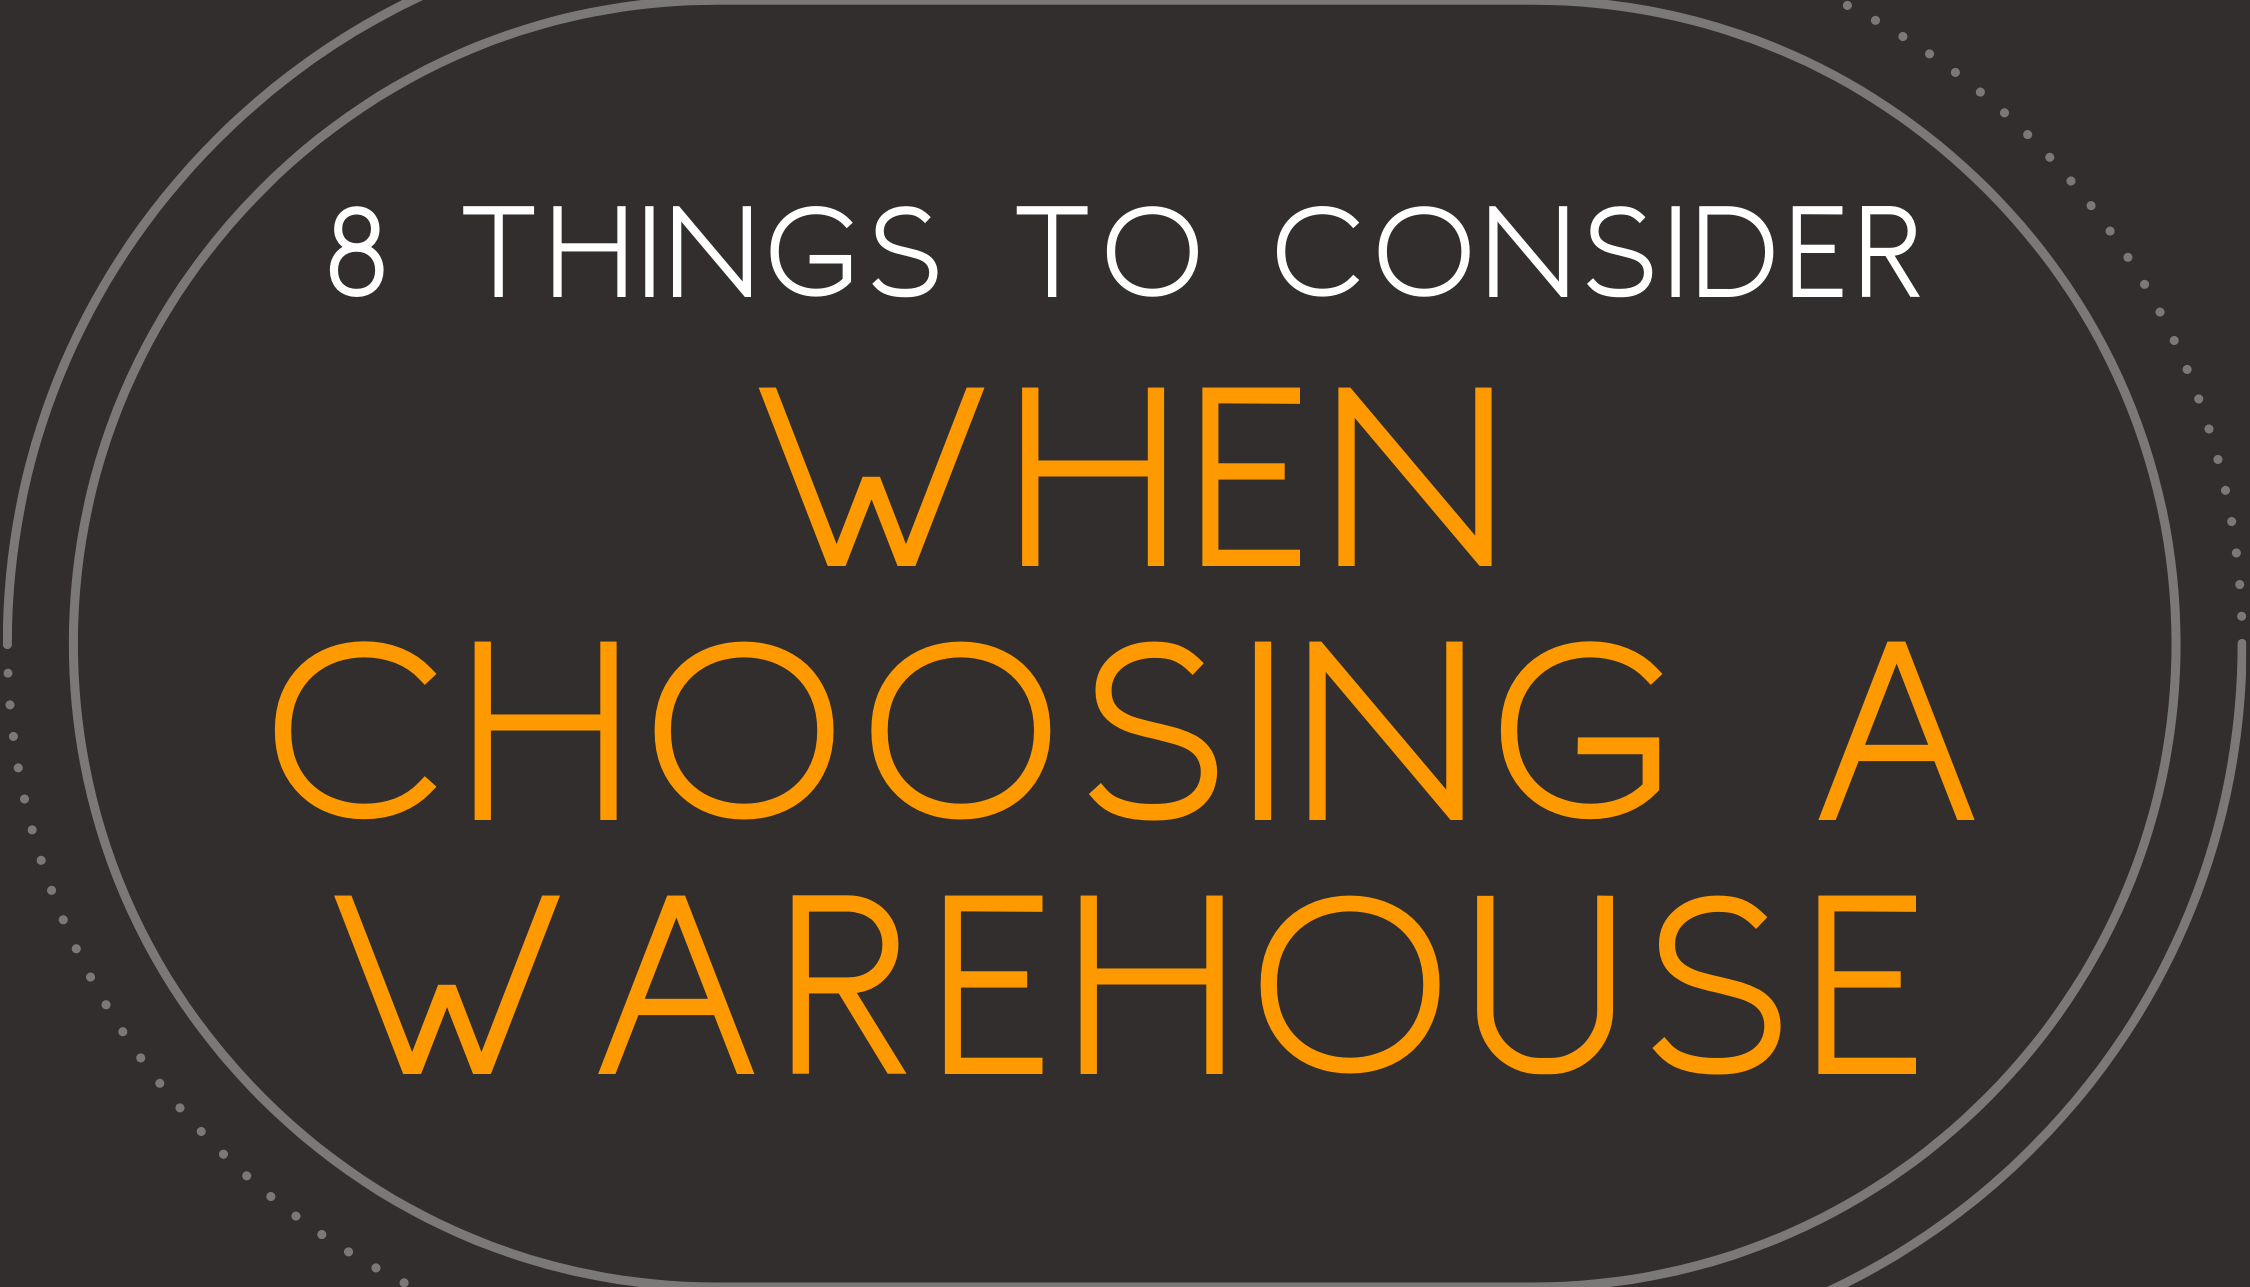 8 Things to Consider When Choosing a Warehouse